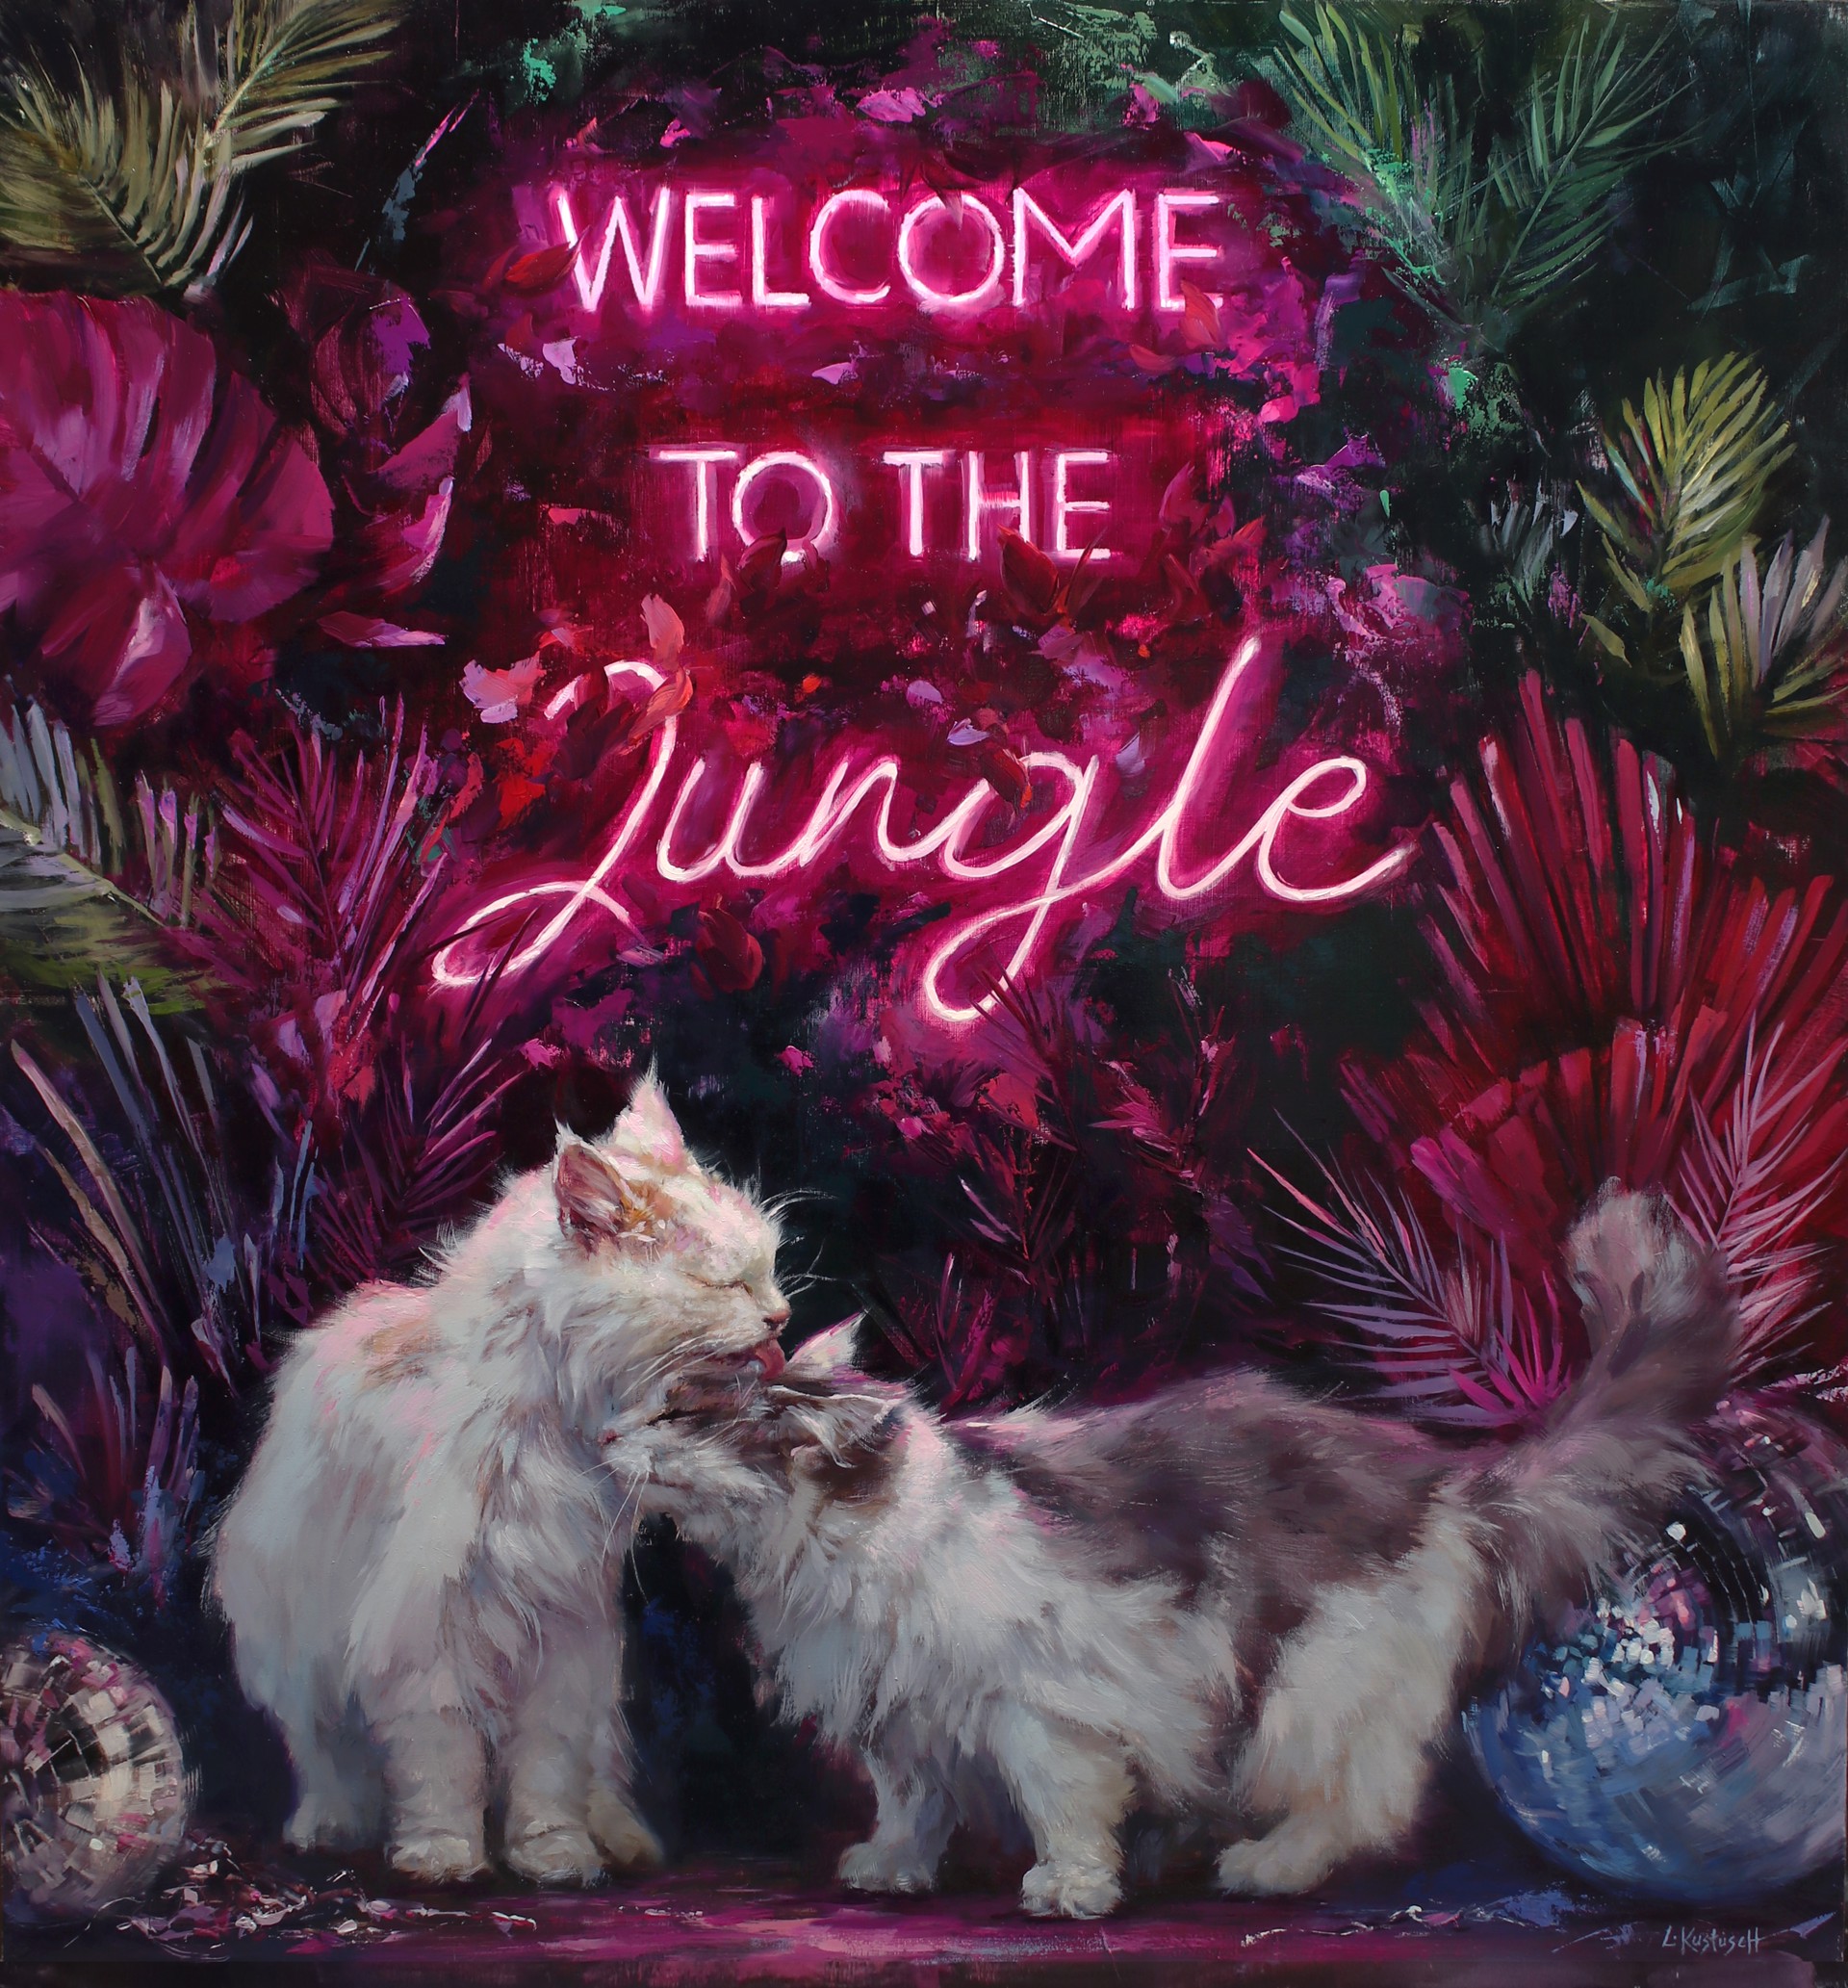 Welcome to the Jungle by Lindsey Kustusch